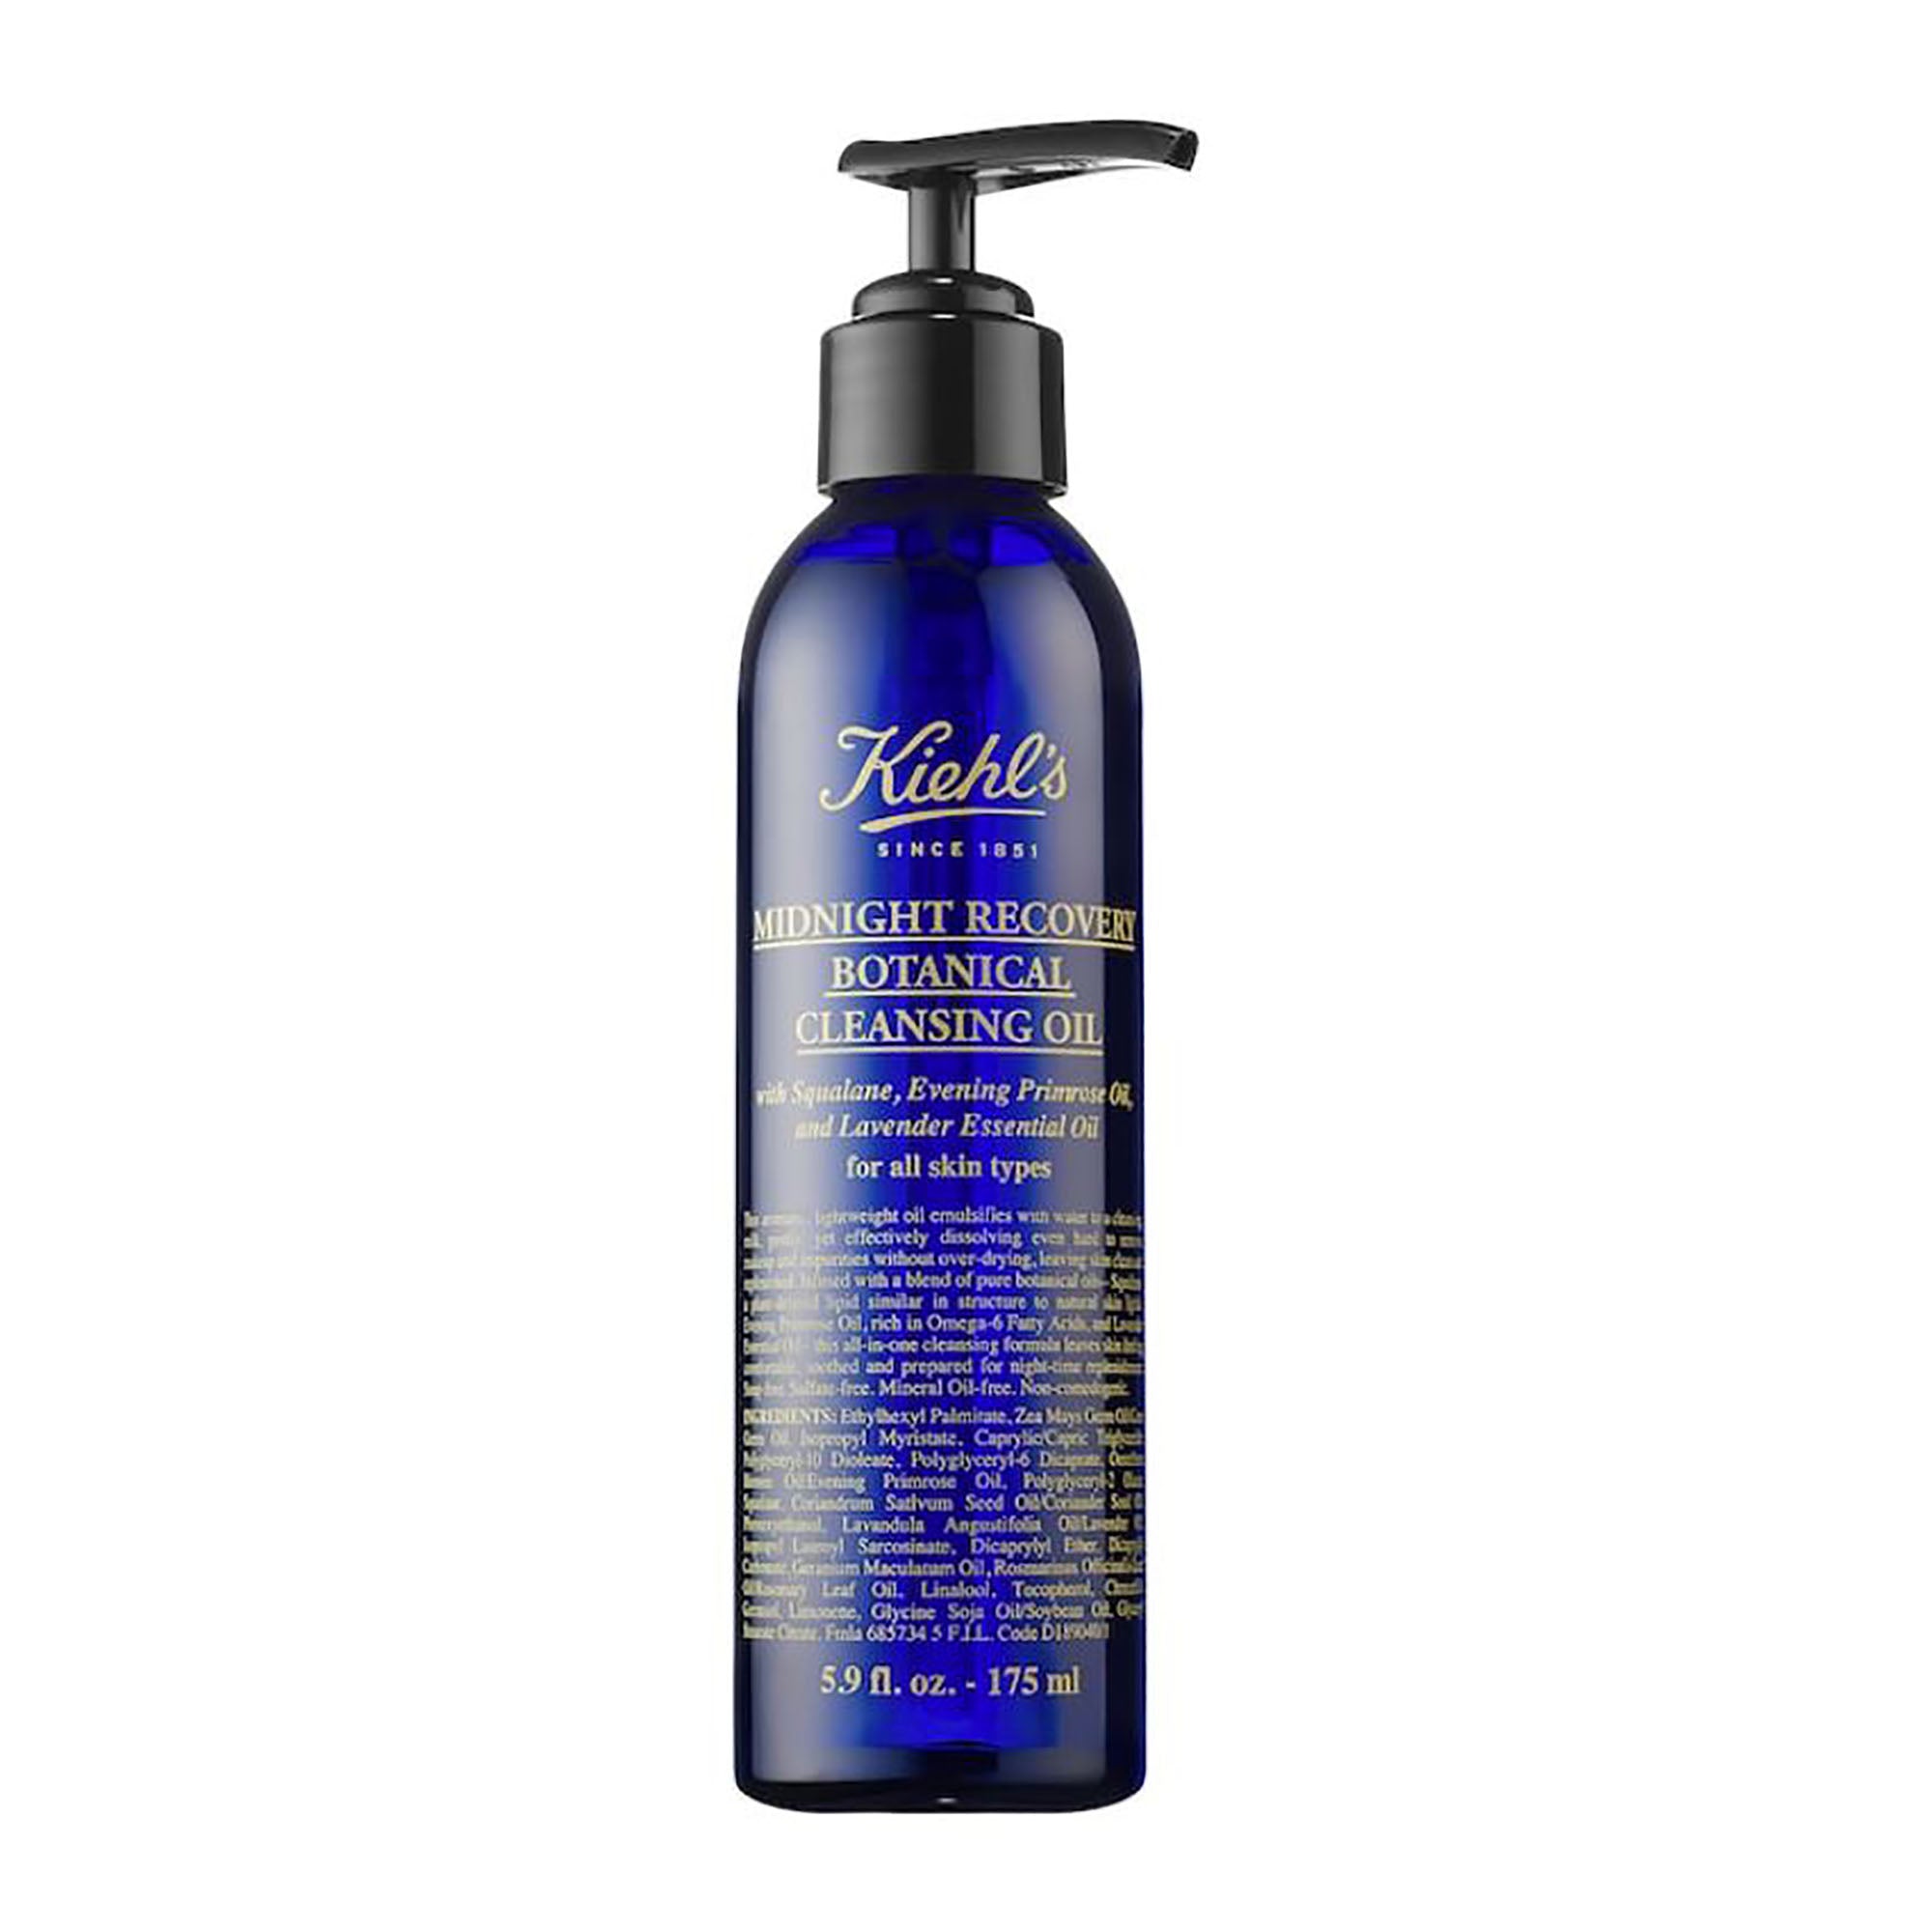 Kiehl's Midnight Recovery Botanical Cleansing Oil / 5.9OZ